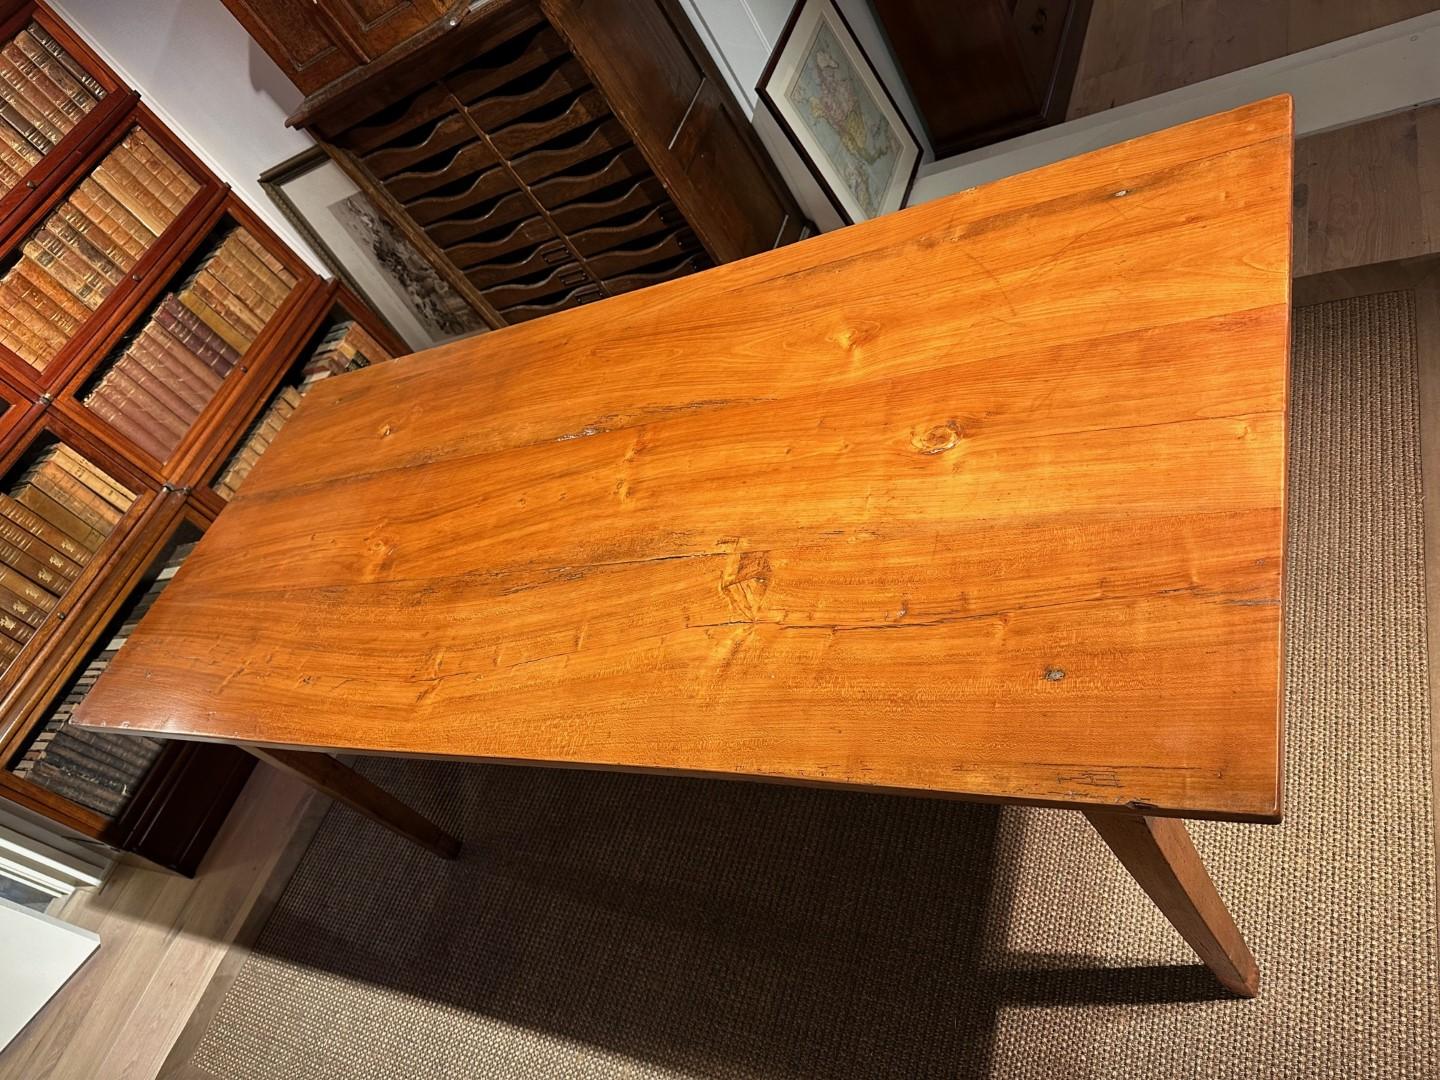 Antique French cherry wood dining room table in very good condition. With 1 drawer and pull-out leaf at the end.
Beautiful weathered cherry wood table with warm color.

Origin: France
Period: 2nd half of the 19th century
Size: 190cm x 85cm x h. 76cm